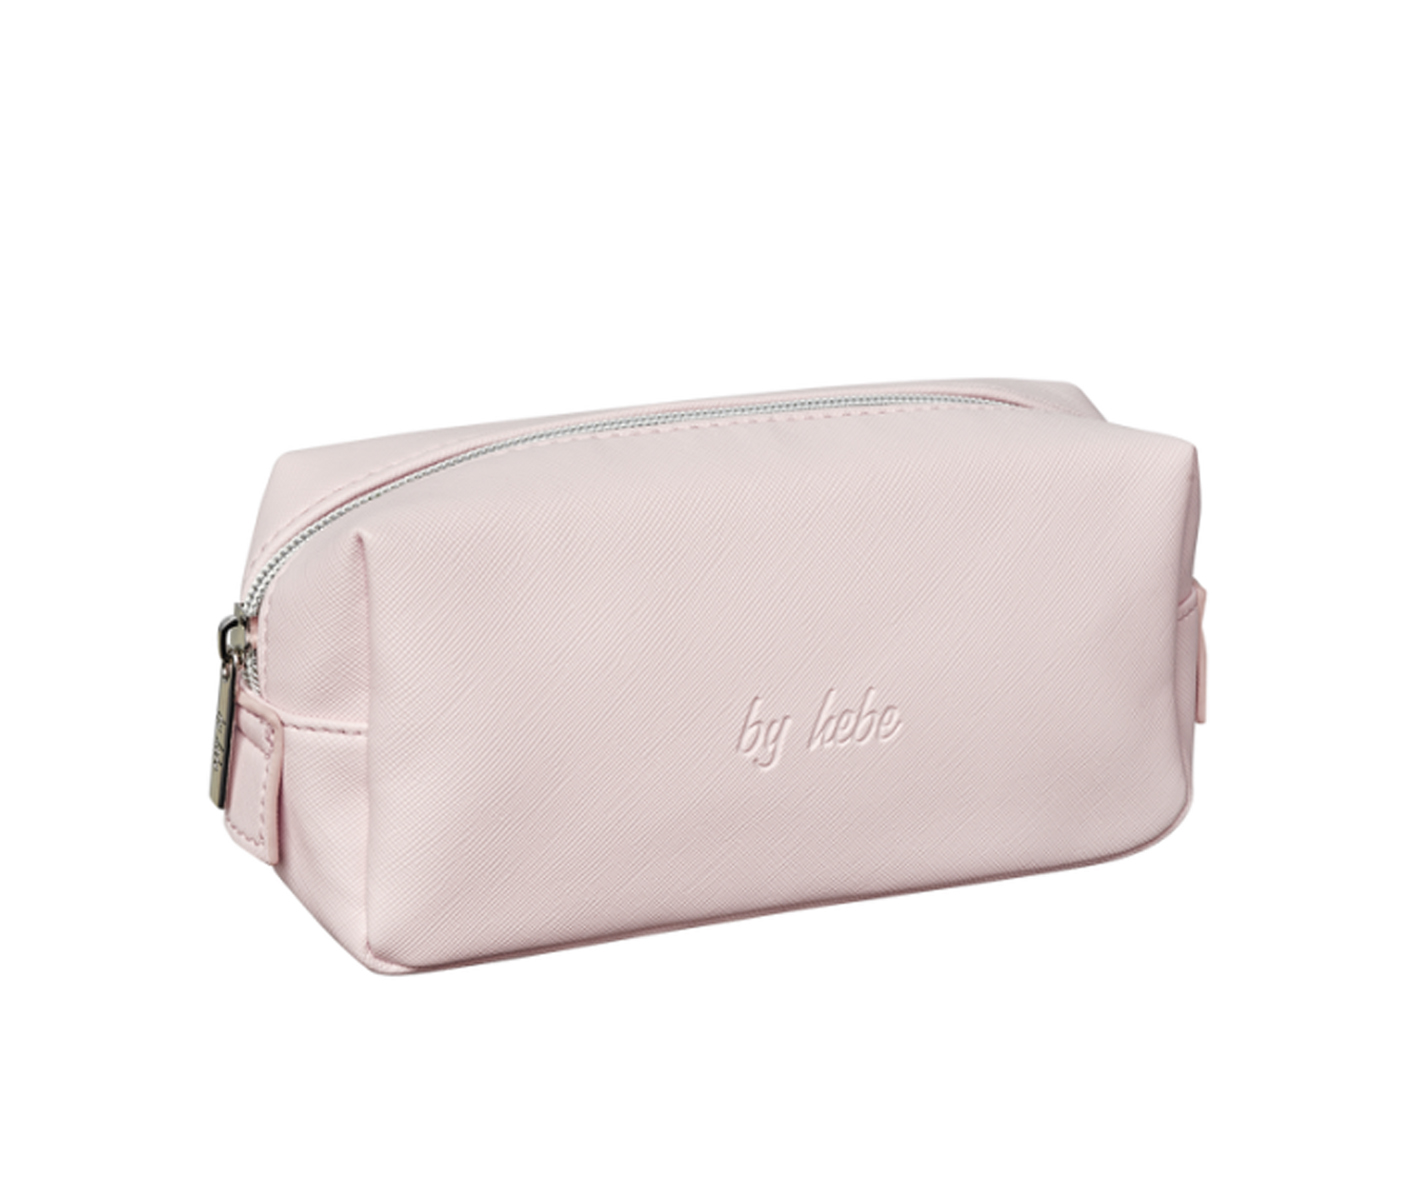 Hebe, small toiletry bag